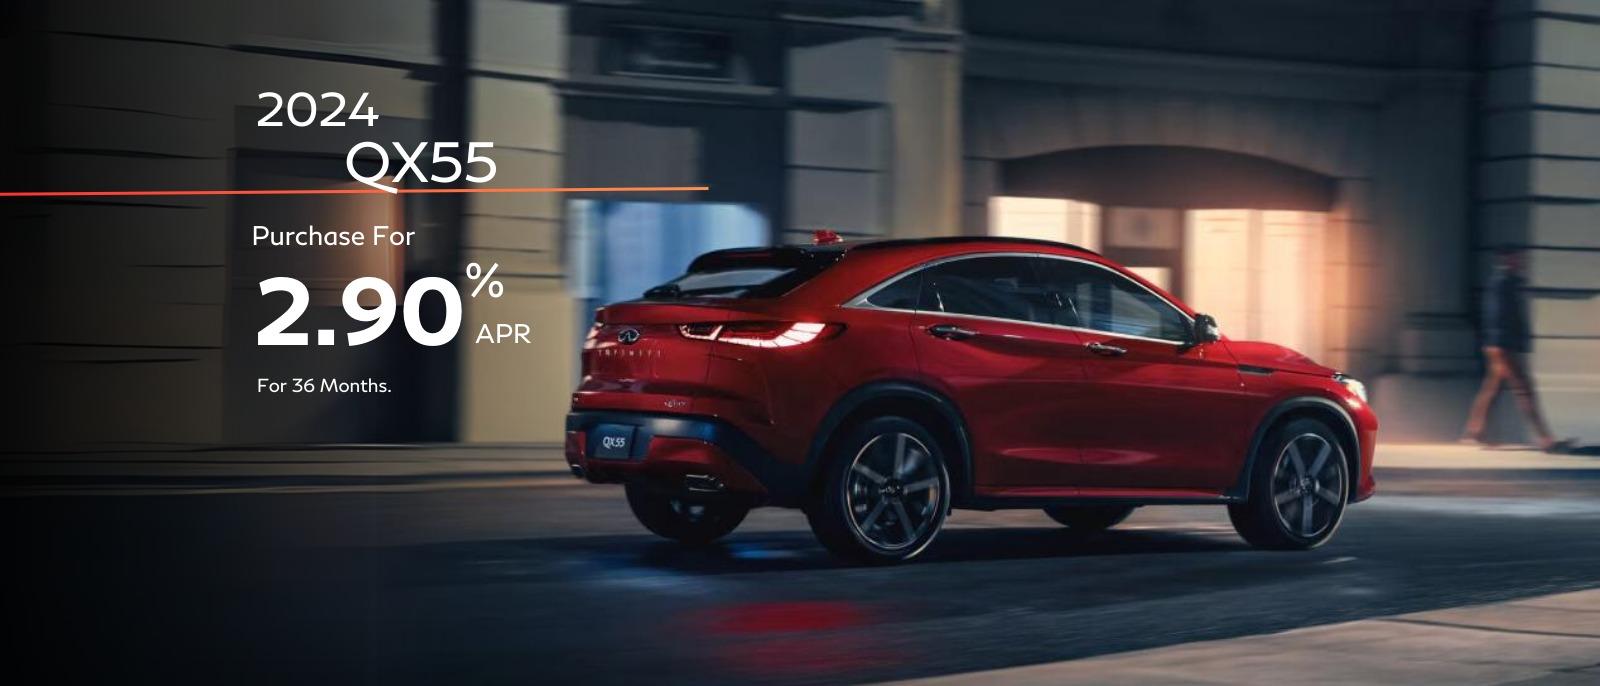 2024 QX55 
2.9% APR financing for 36 months for well qualified buyers.